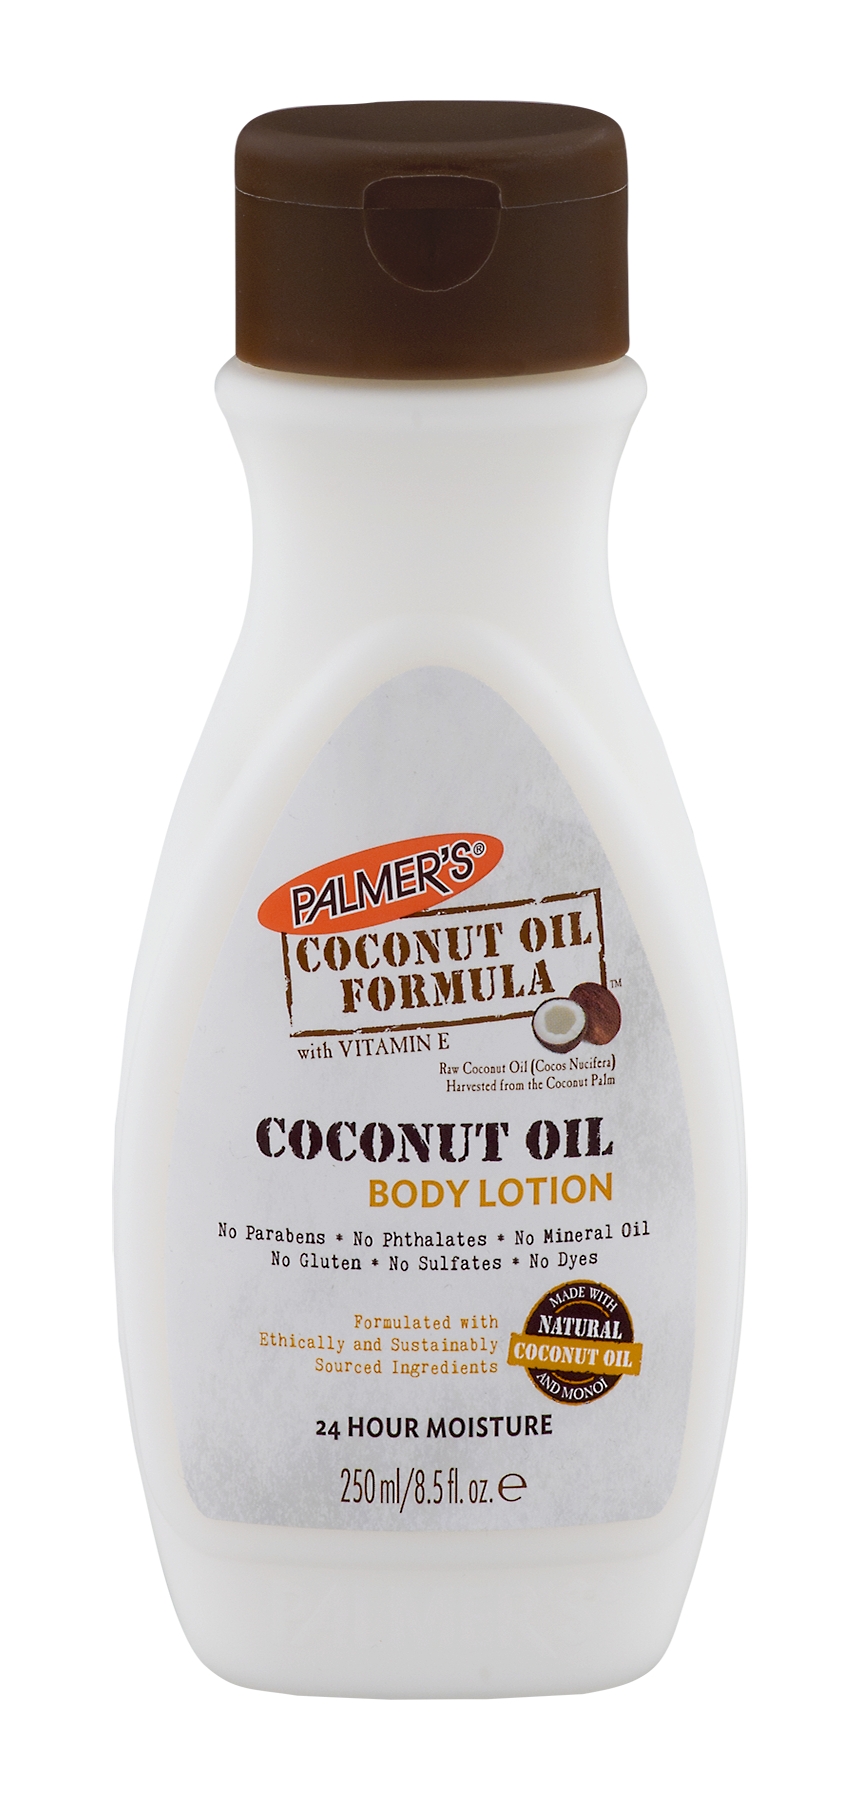 Coconut Oil Body Lotion - Easy Buying